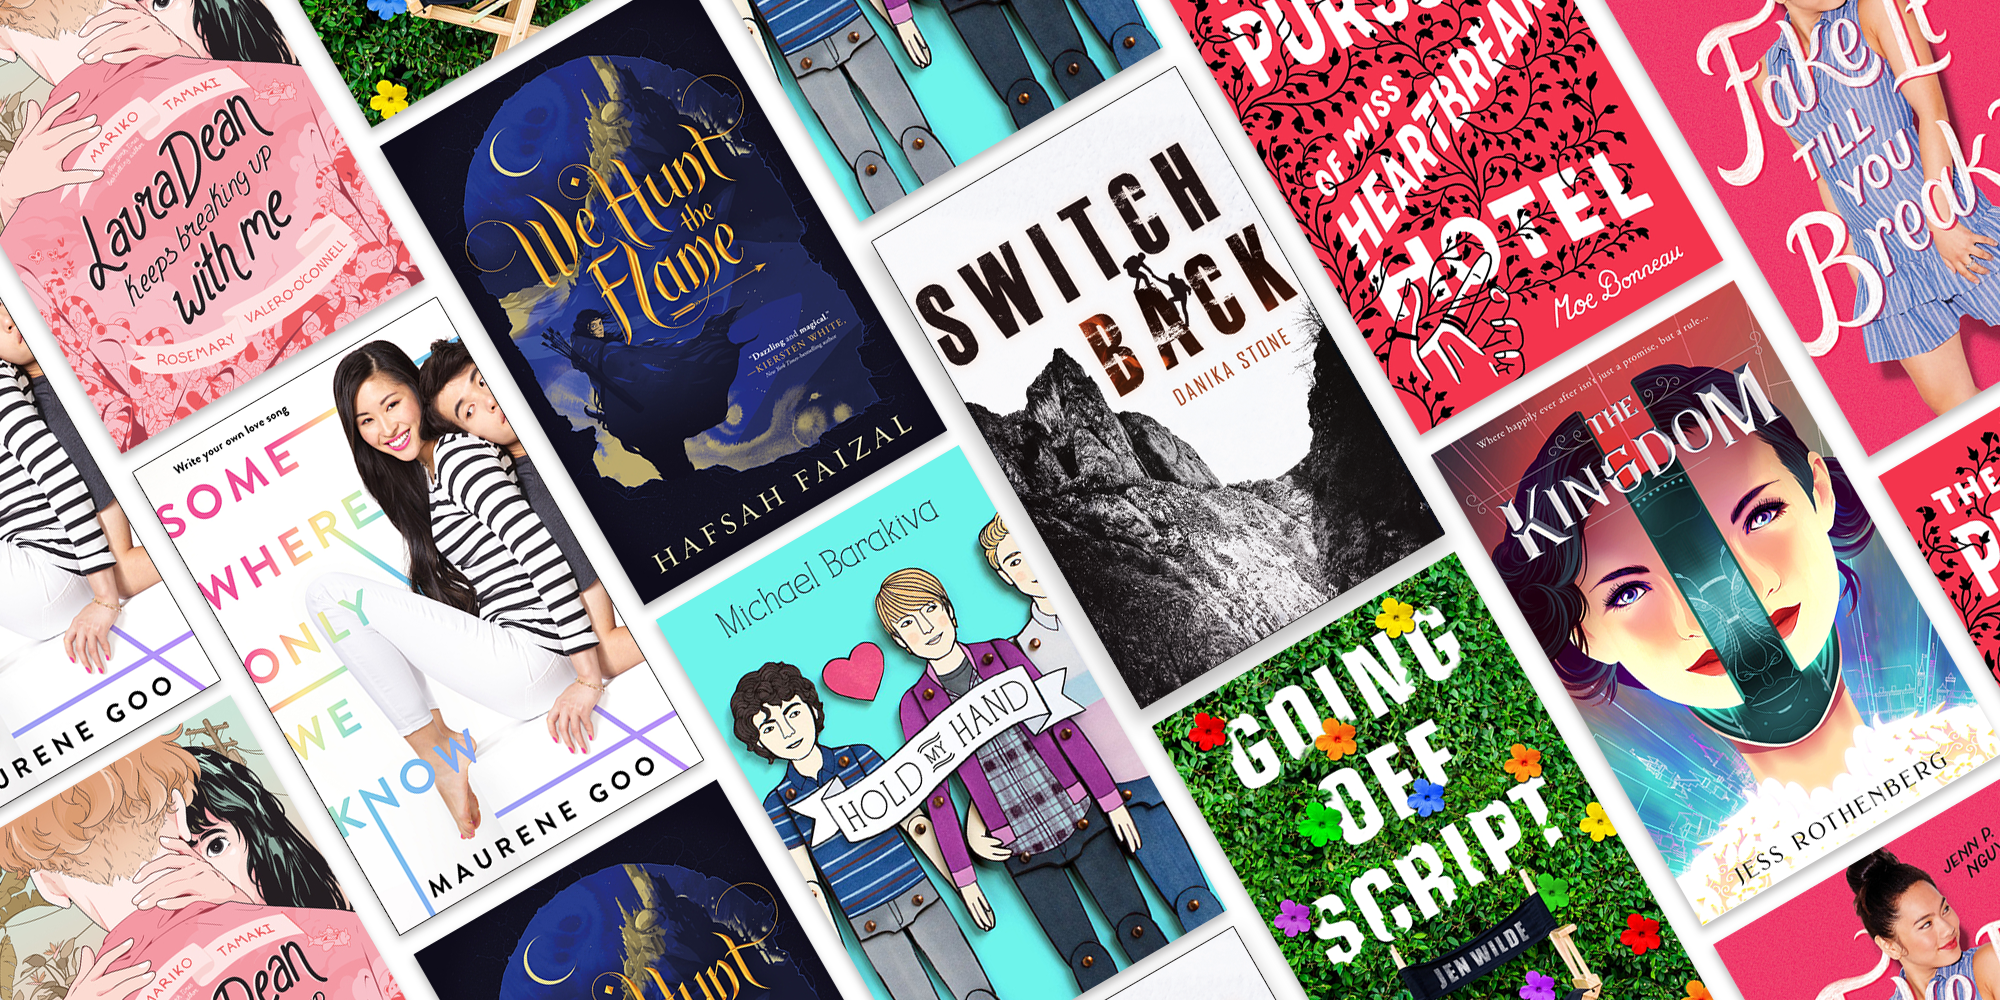 9 May New Releases You Need to Add to Your TBR List ASAP